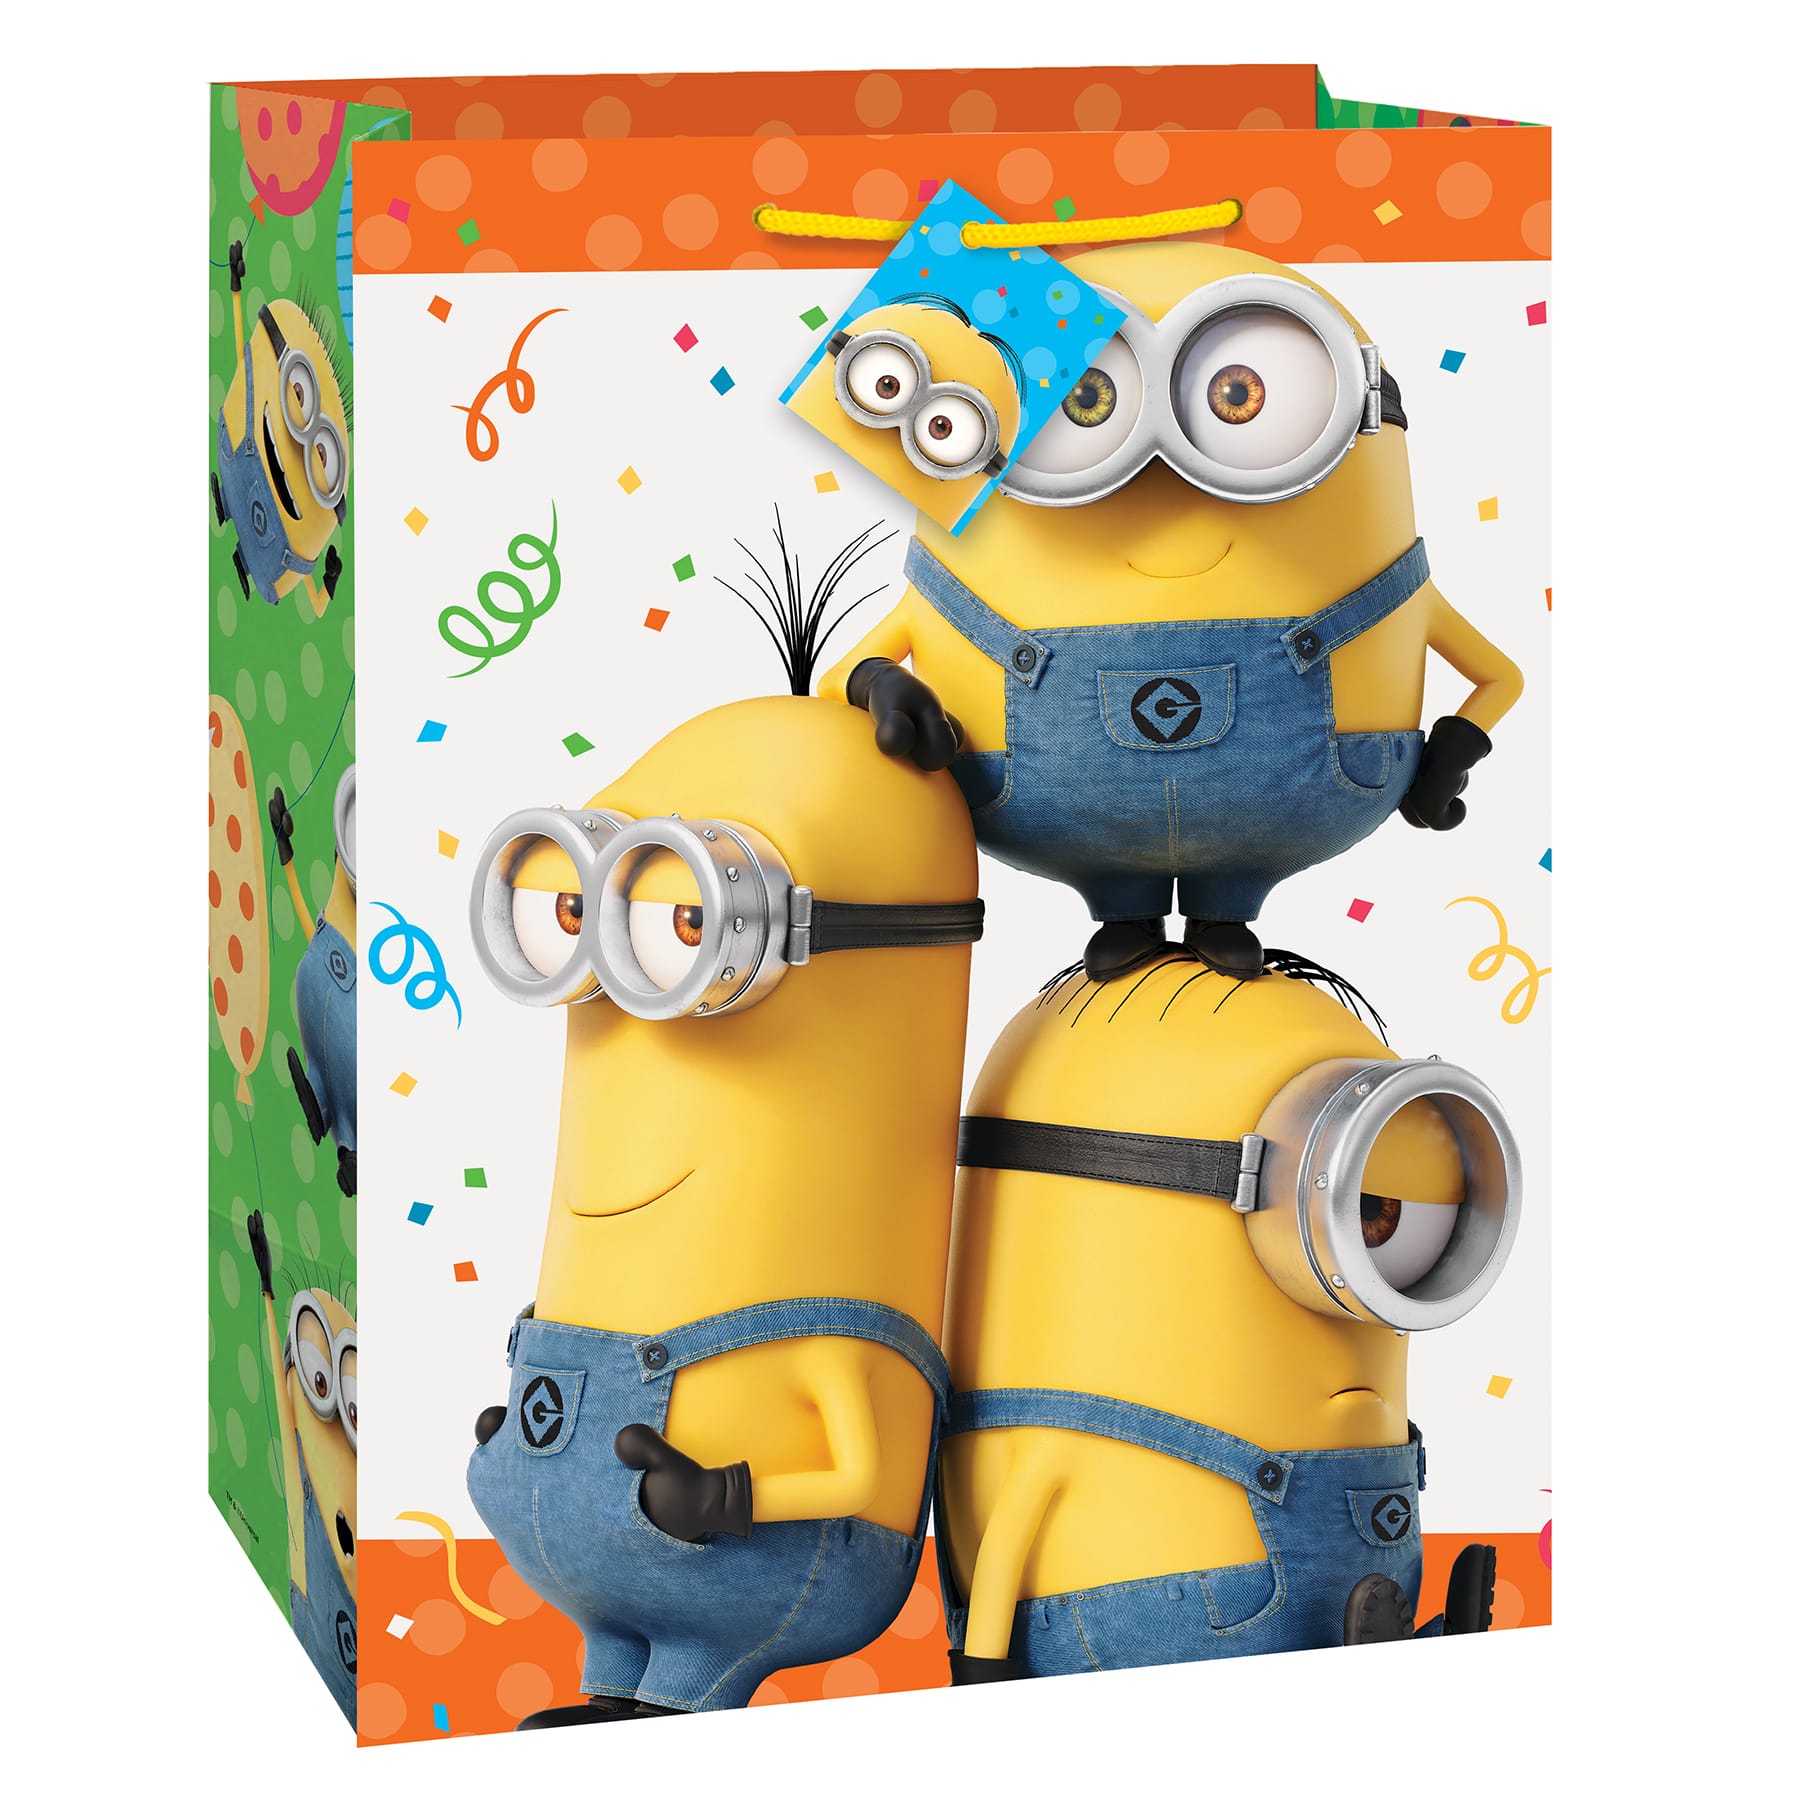 Despicable Me Sticker/Colouring/Activity/Packs/Kits/Design/Kids/Gift Minions 